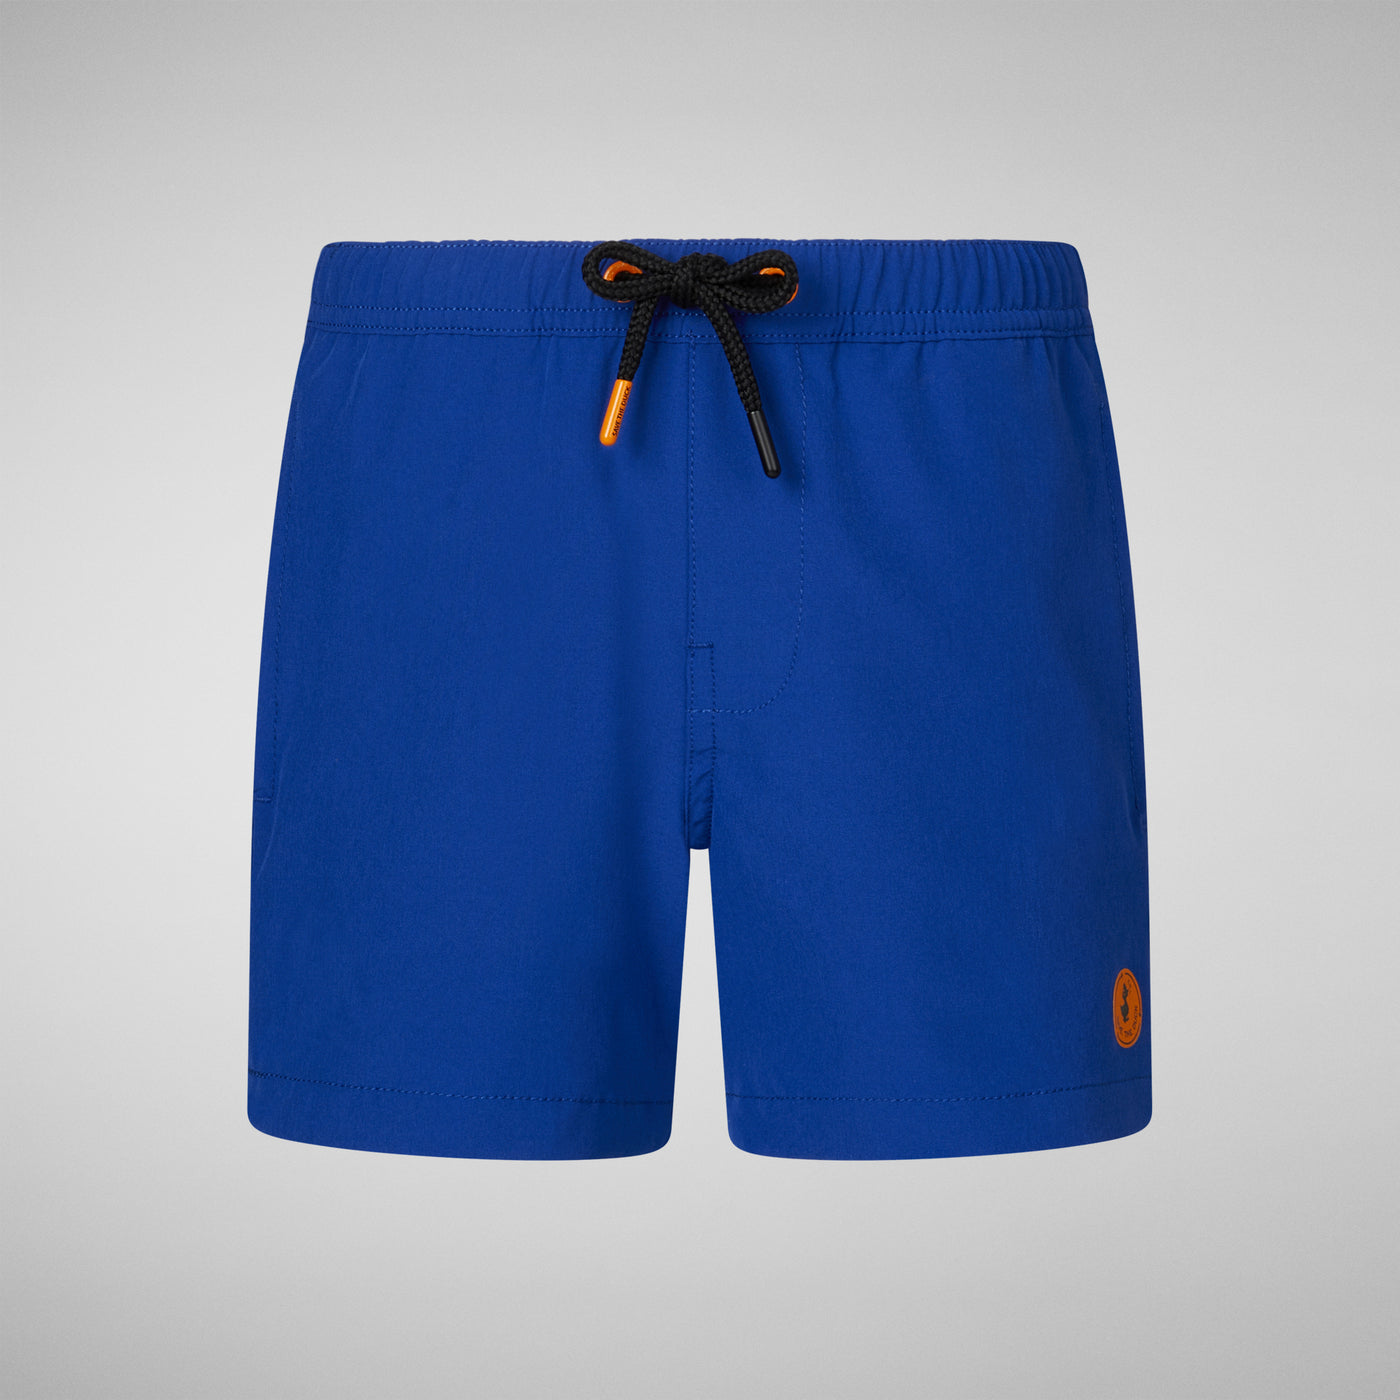 Product Front View of Boys' Adao Swim Trunks in Cyber Blue